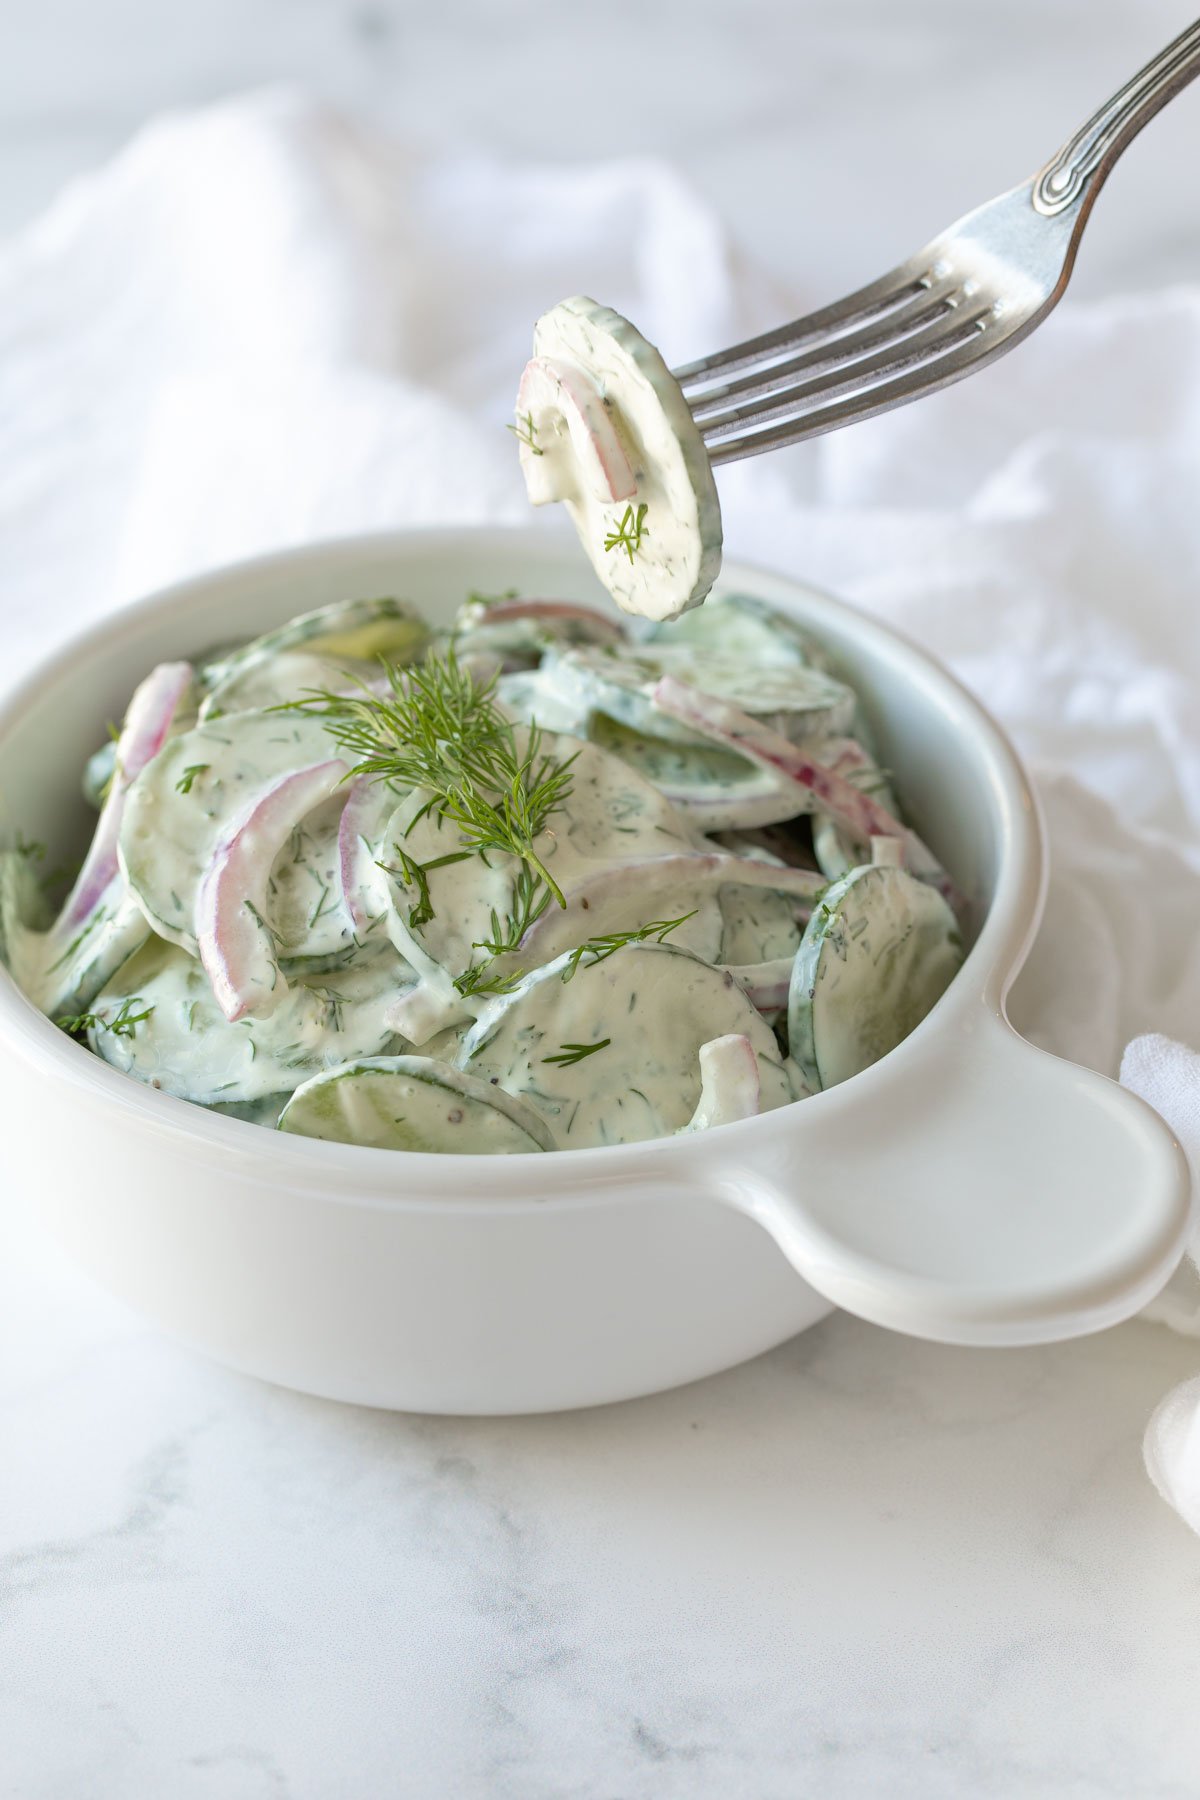 A fork holding a slice of cucumber and onion over a bowl of German cucumber salad.